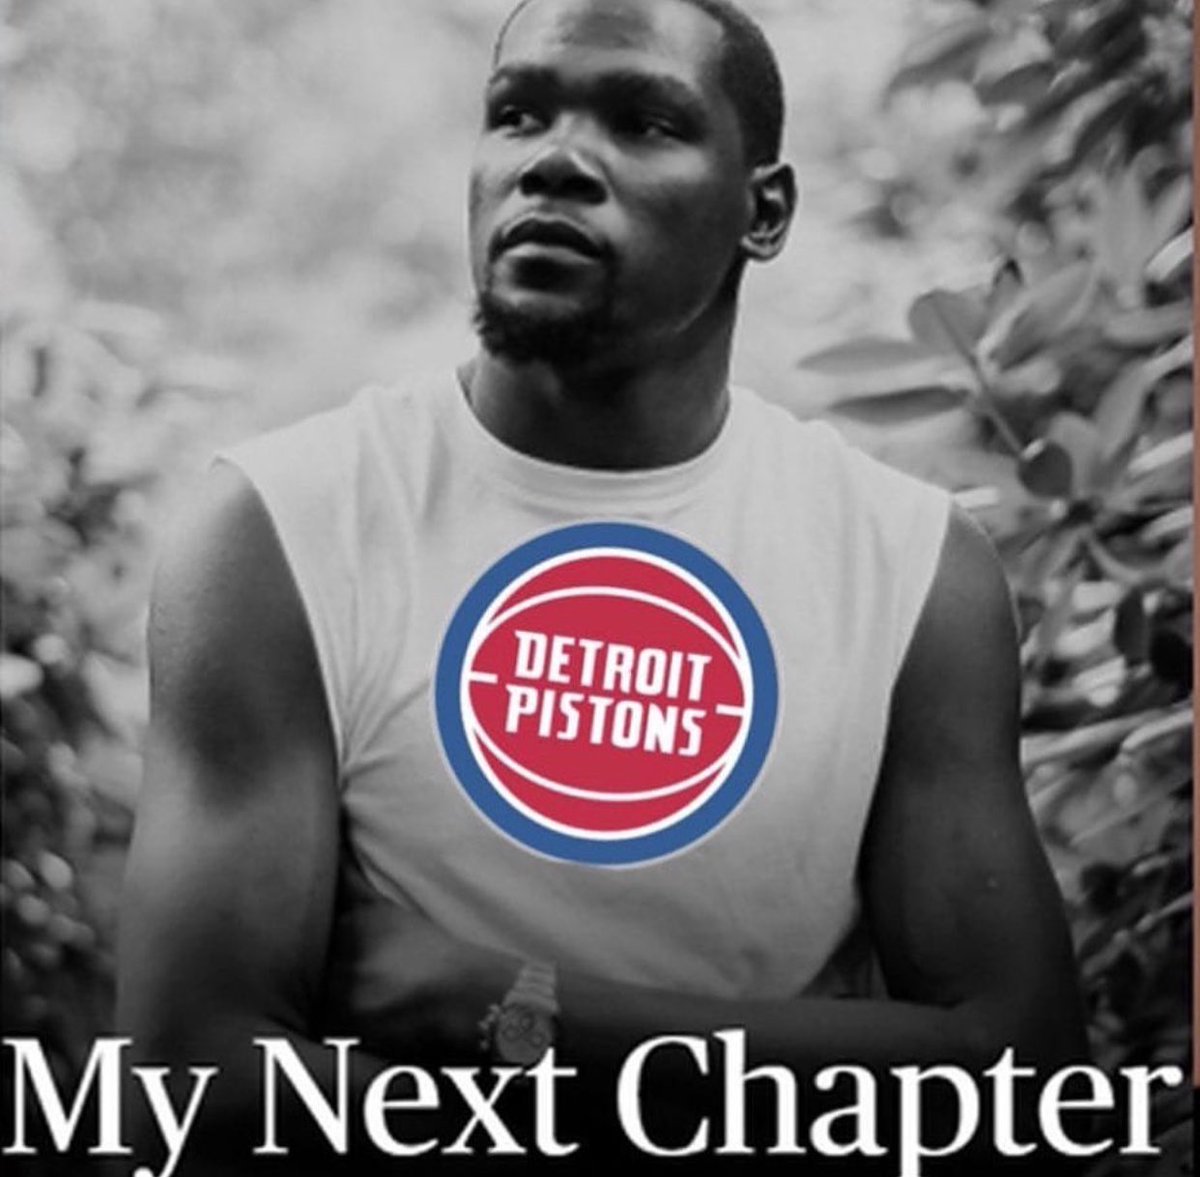 It’s your move @KDTrey5